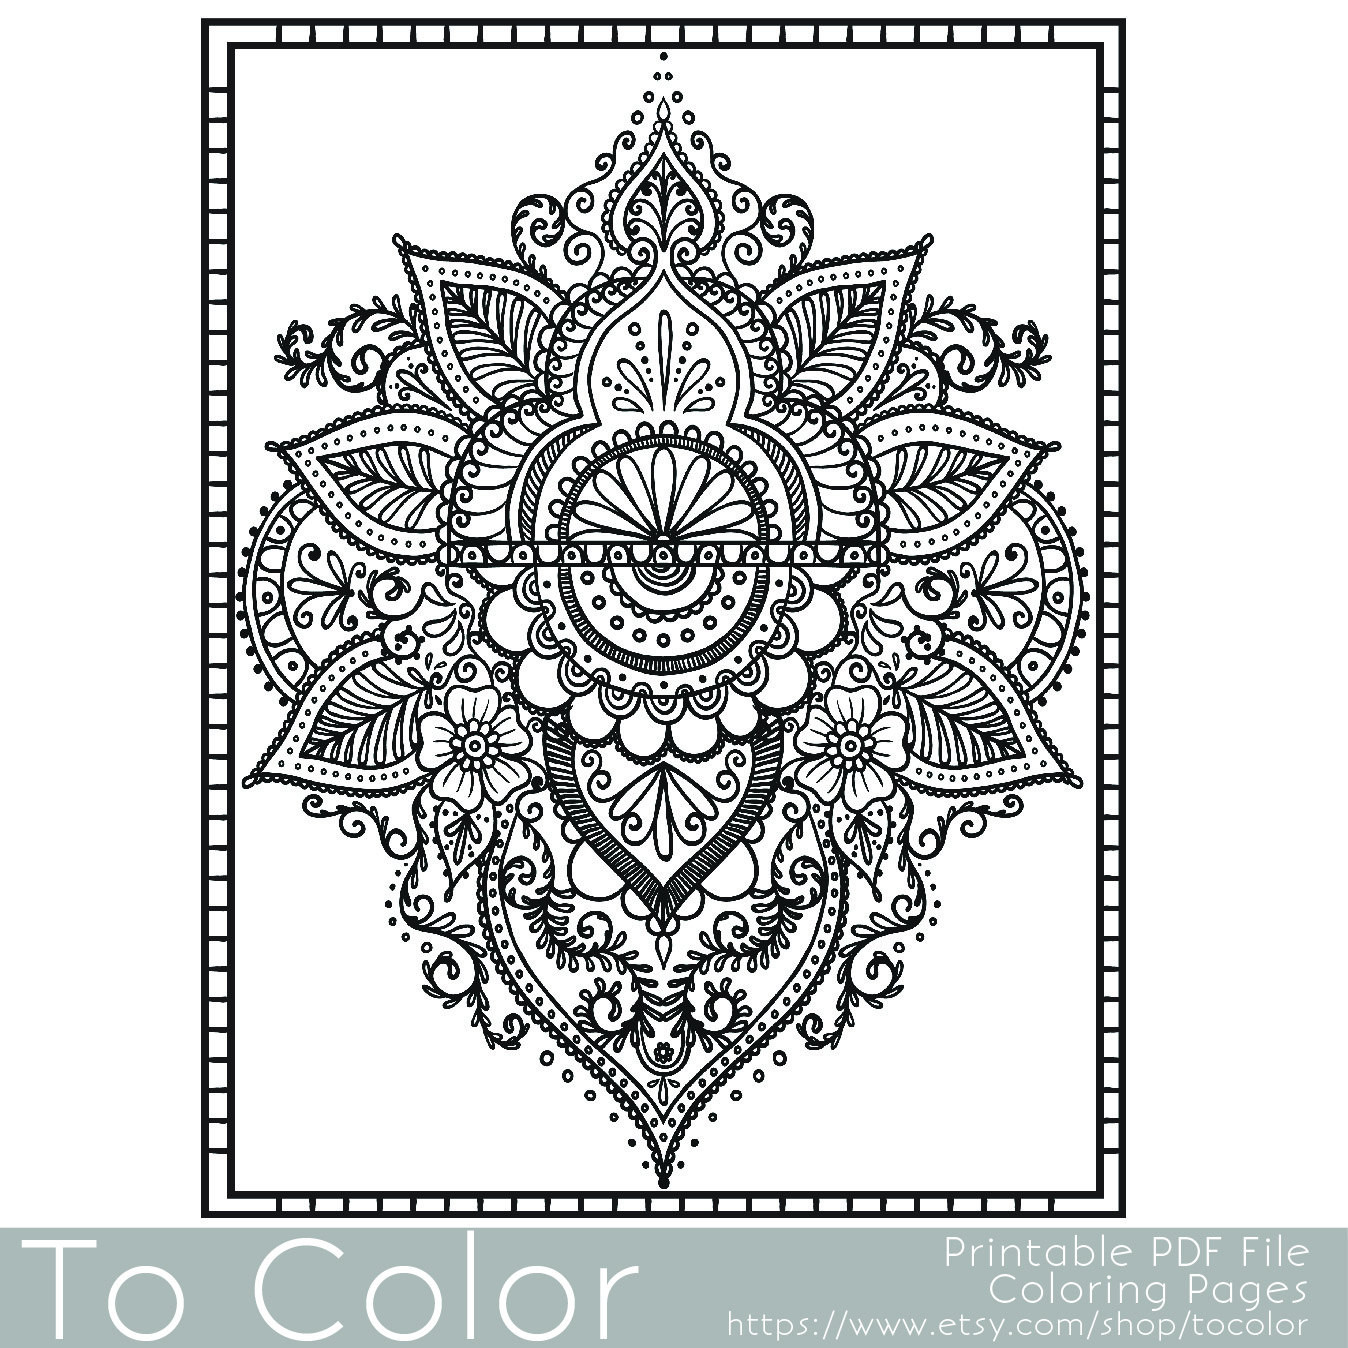 Paisley Printable Coloring Pages
 Paisley Printable Coloring Pages for Adults Paisley by ToColor